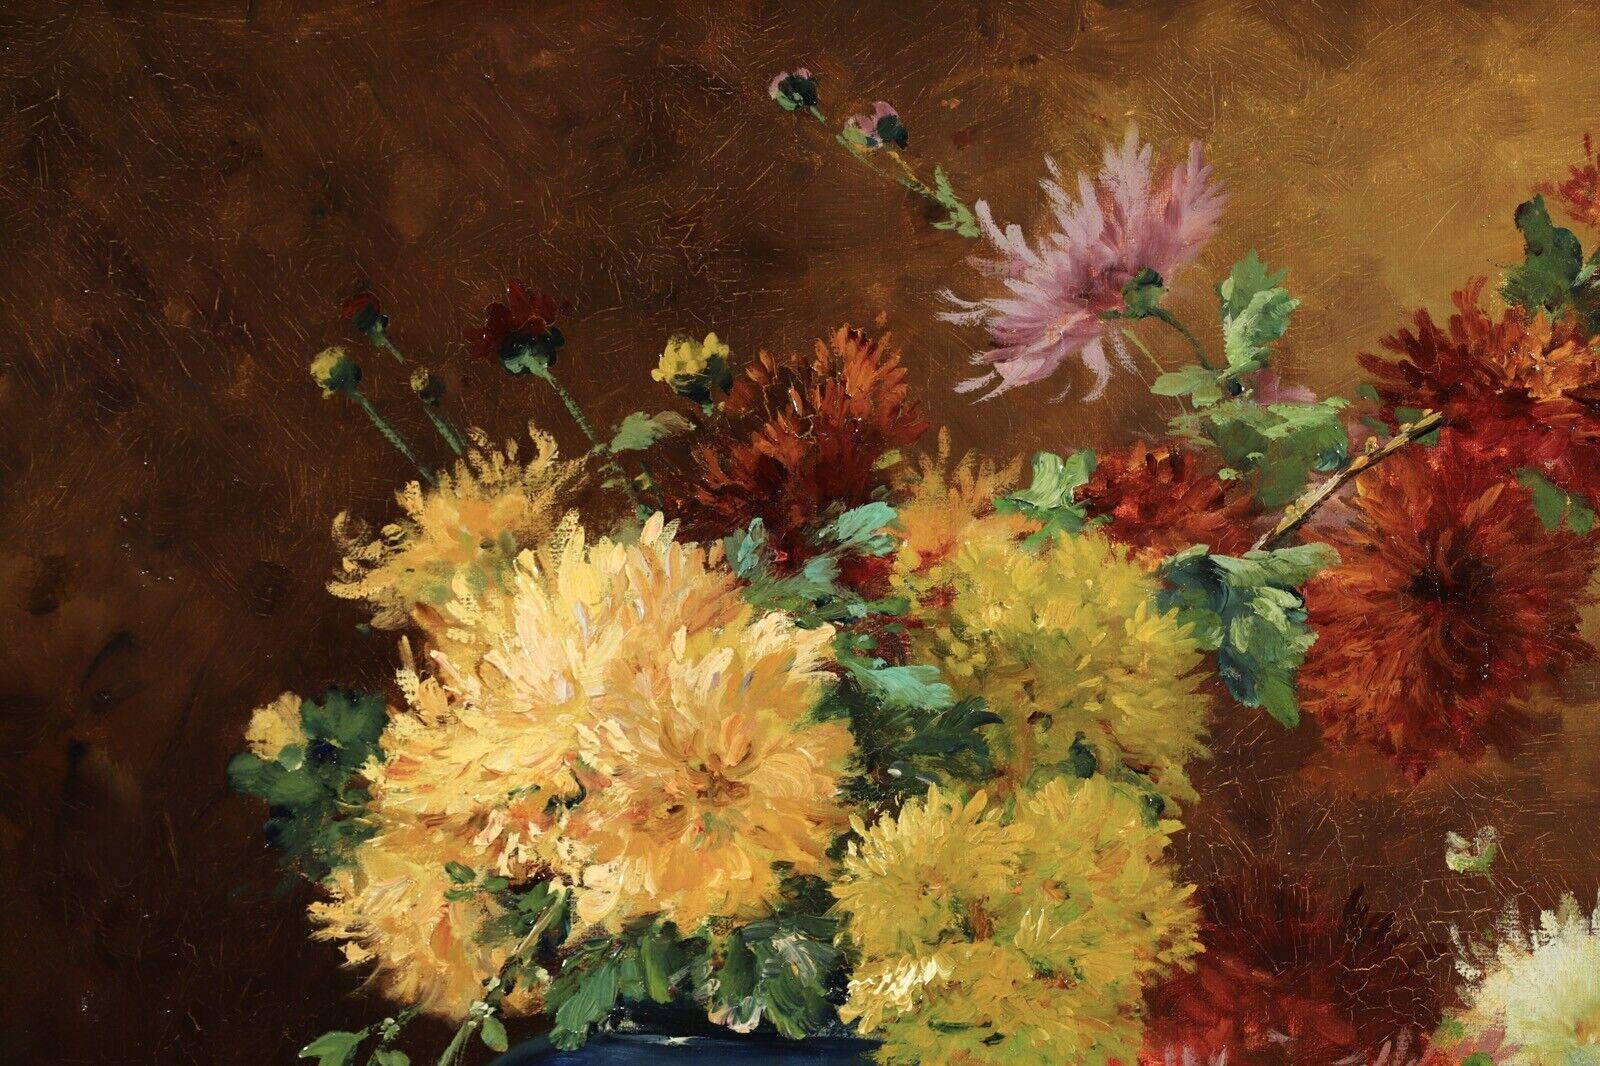 Eugene-Henri Cauchois (French, 1850-1911) impressionist still life flowers with vase, oil on canvas.
Signed lower right corner by the artist.
Provenance: a private French collection.
Professional restorations to verso, ready to hang.
Dimensions